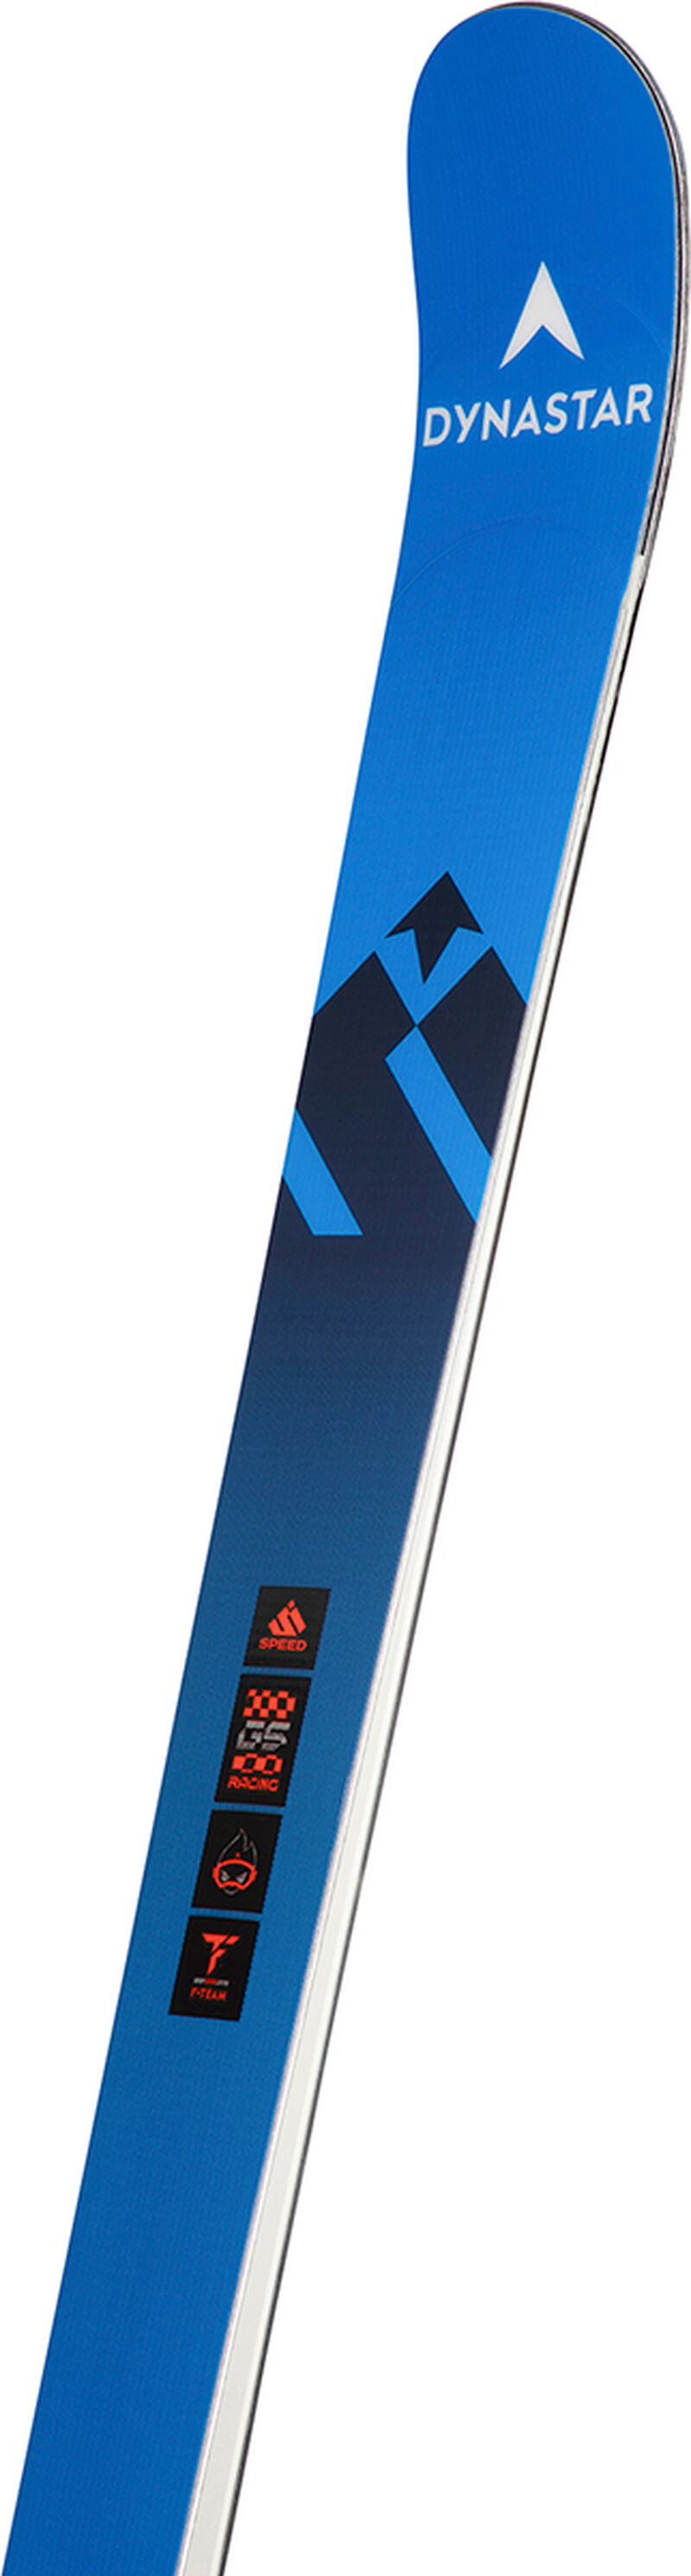 Unisex Racing skis Speed Course WC GS 170-182 R22